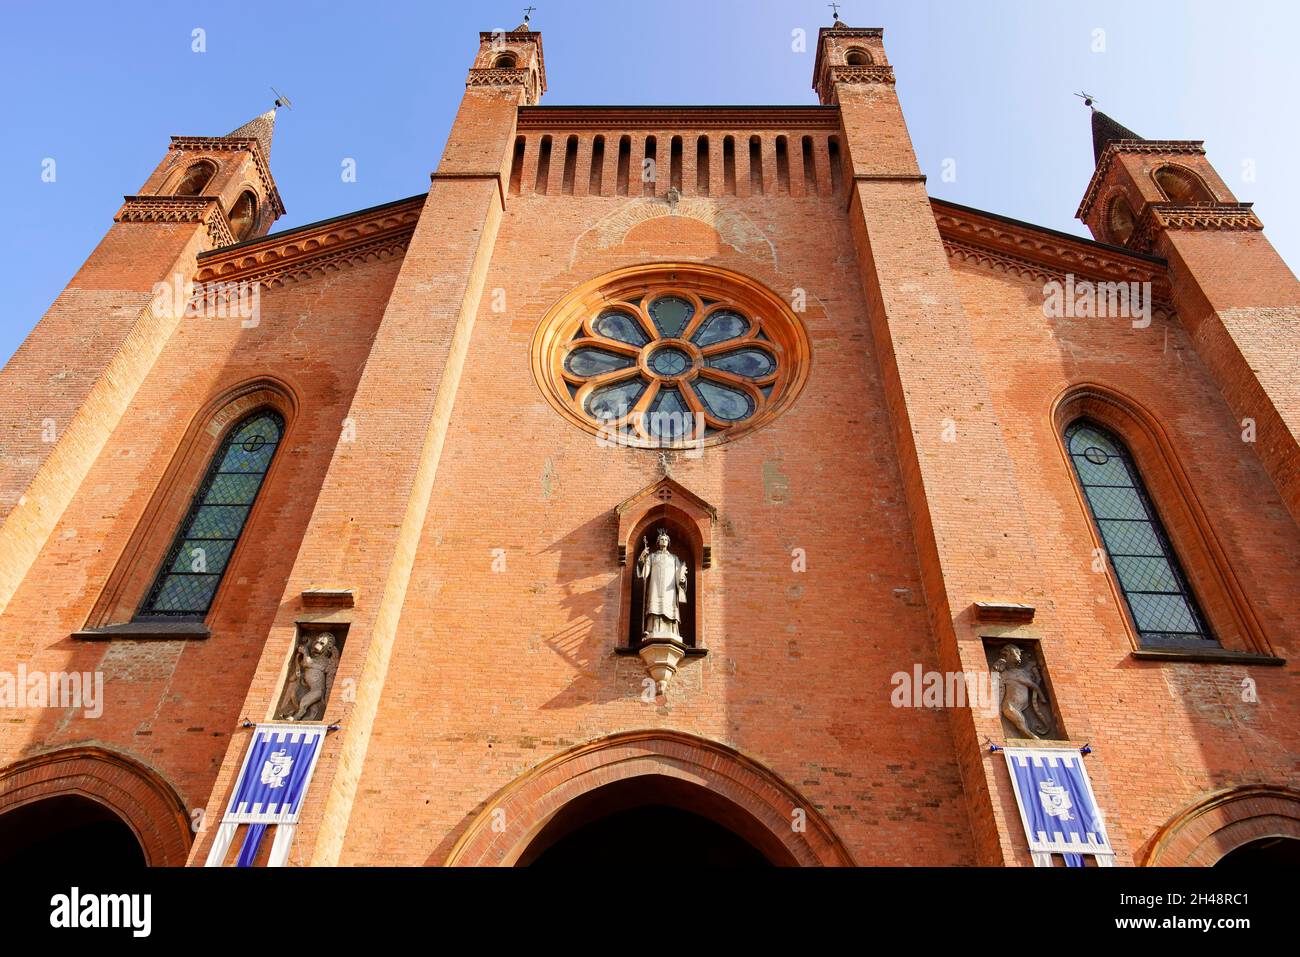 Facade of Cathedral of San Lorenzo in Alba, Piedmonte Region, Italy. The cathedral is located in the eastern sector of the ancient city of Alba Pompei Stock Photo